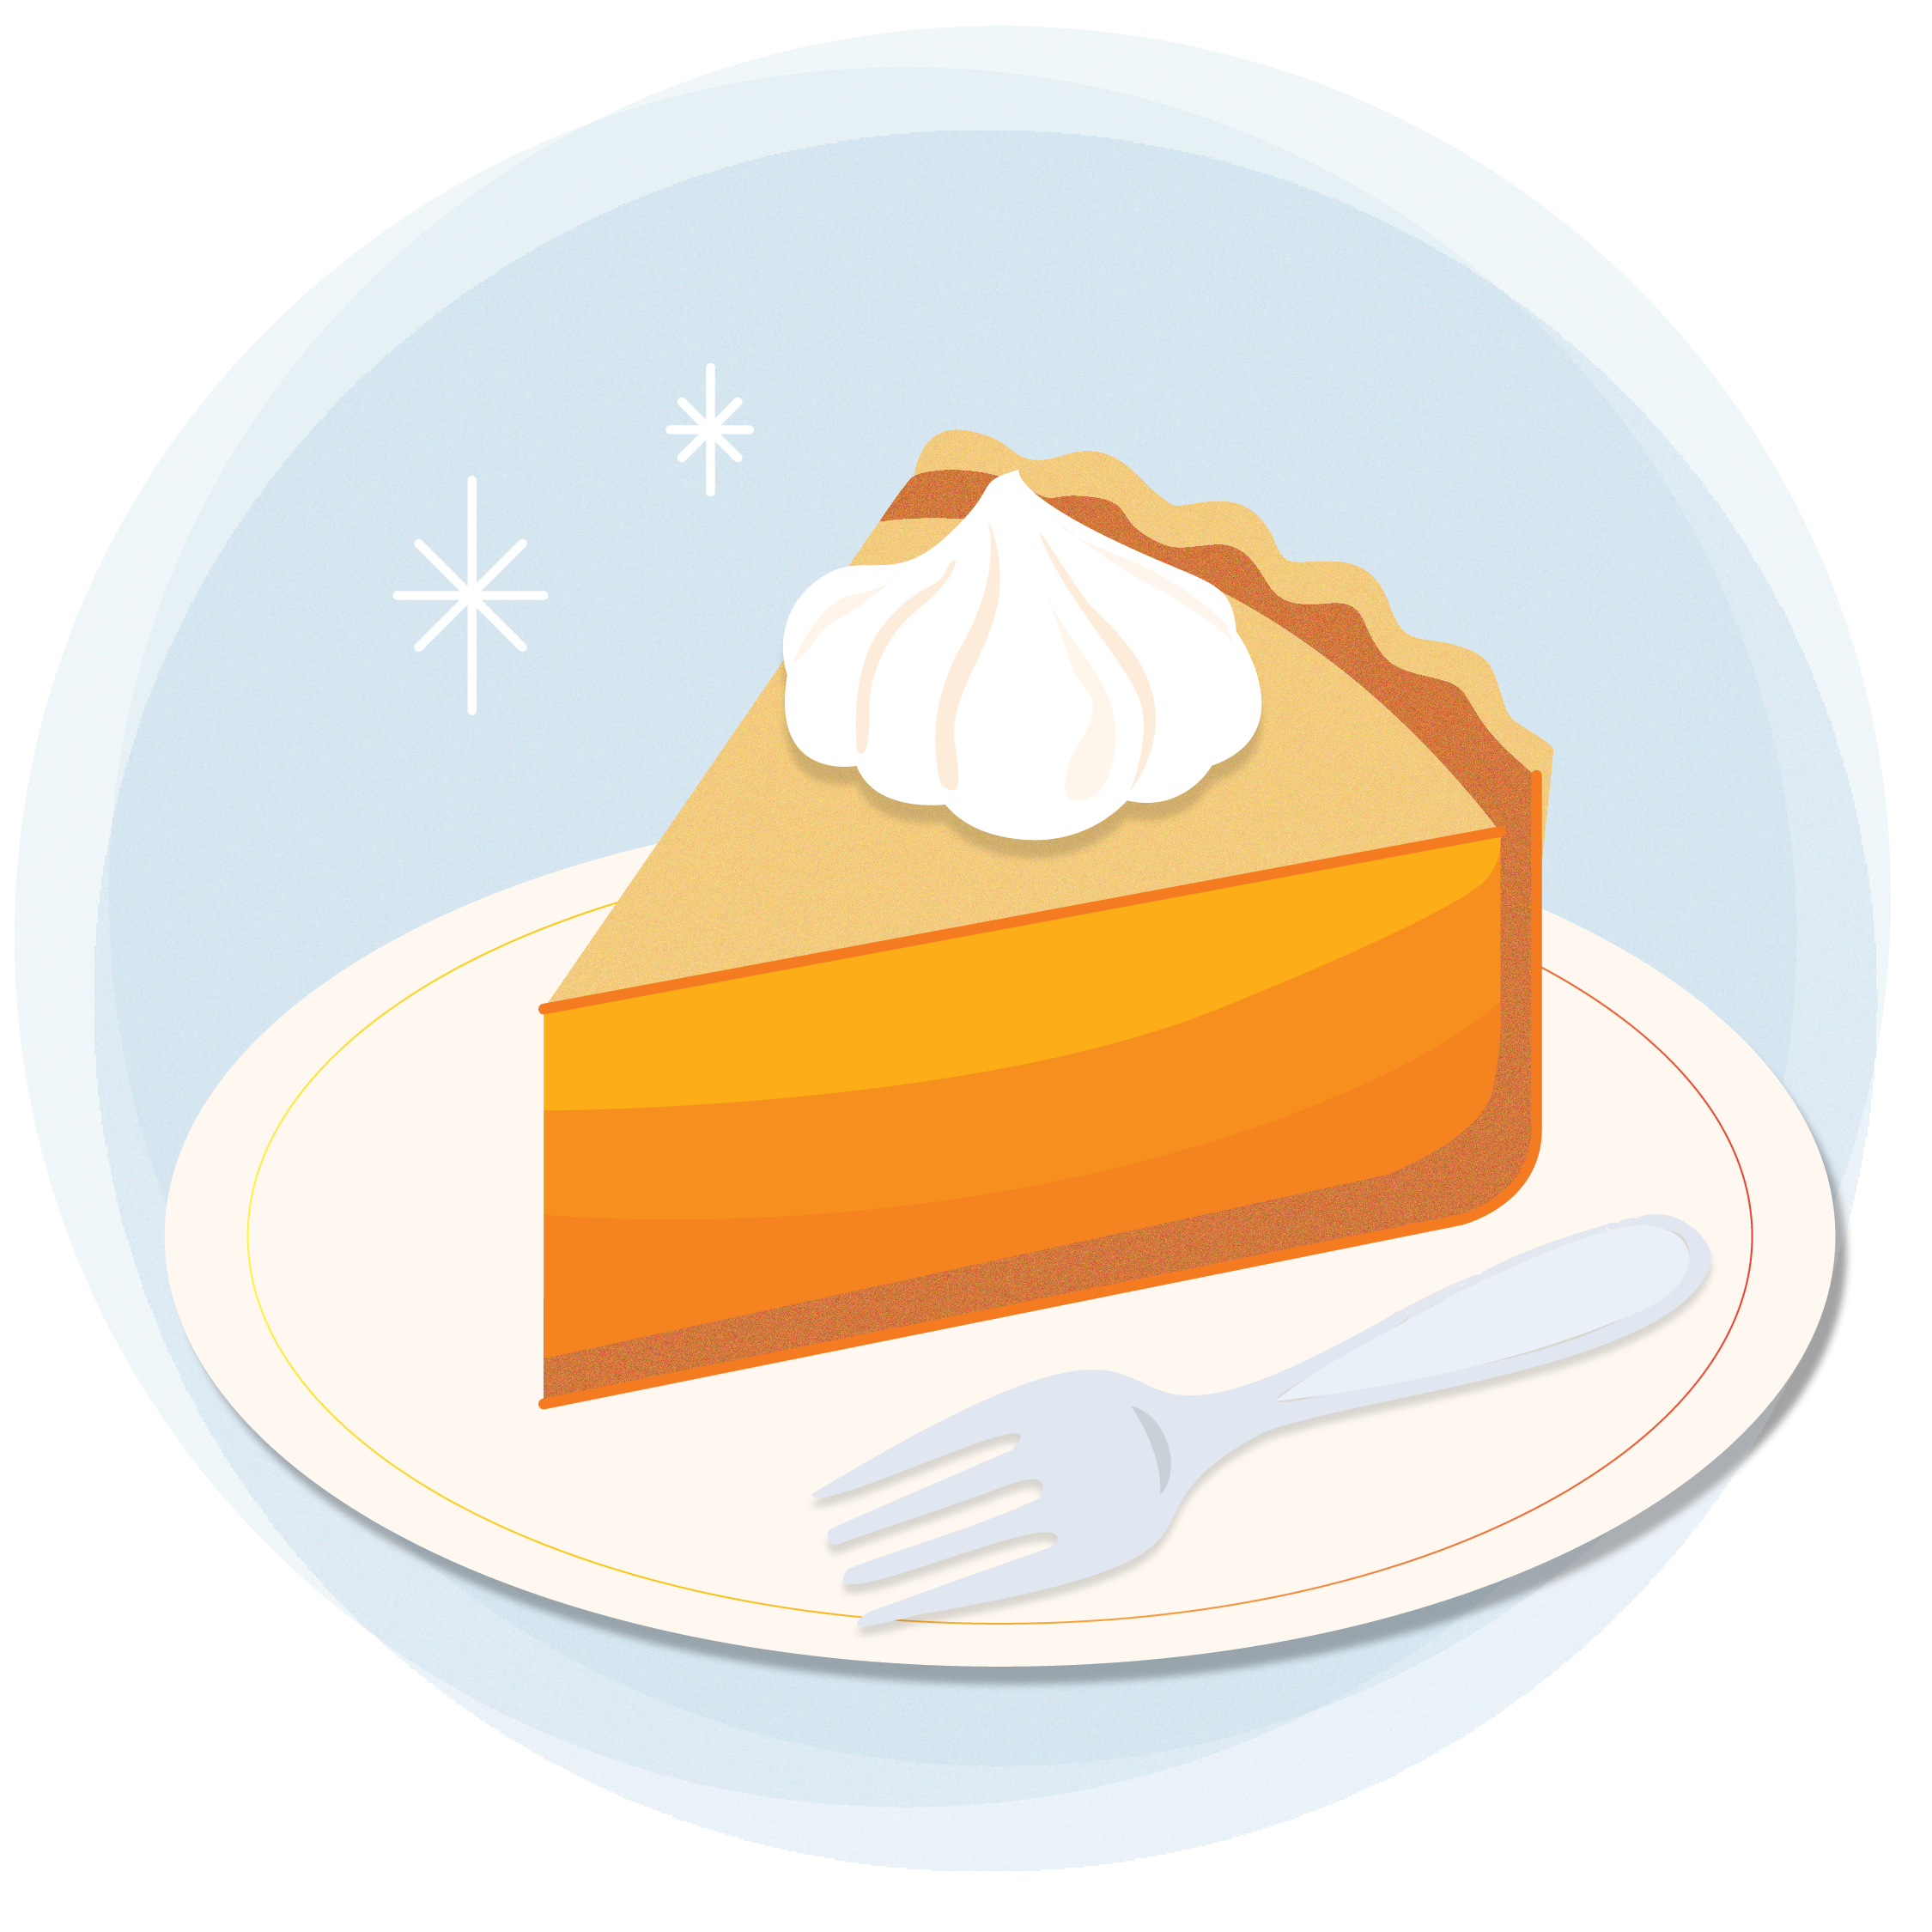 Illustration of a piece of pumpkin pie on a plate with a fork and a dollop of whipped cream on top